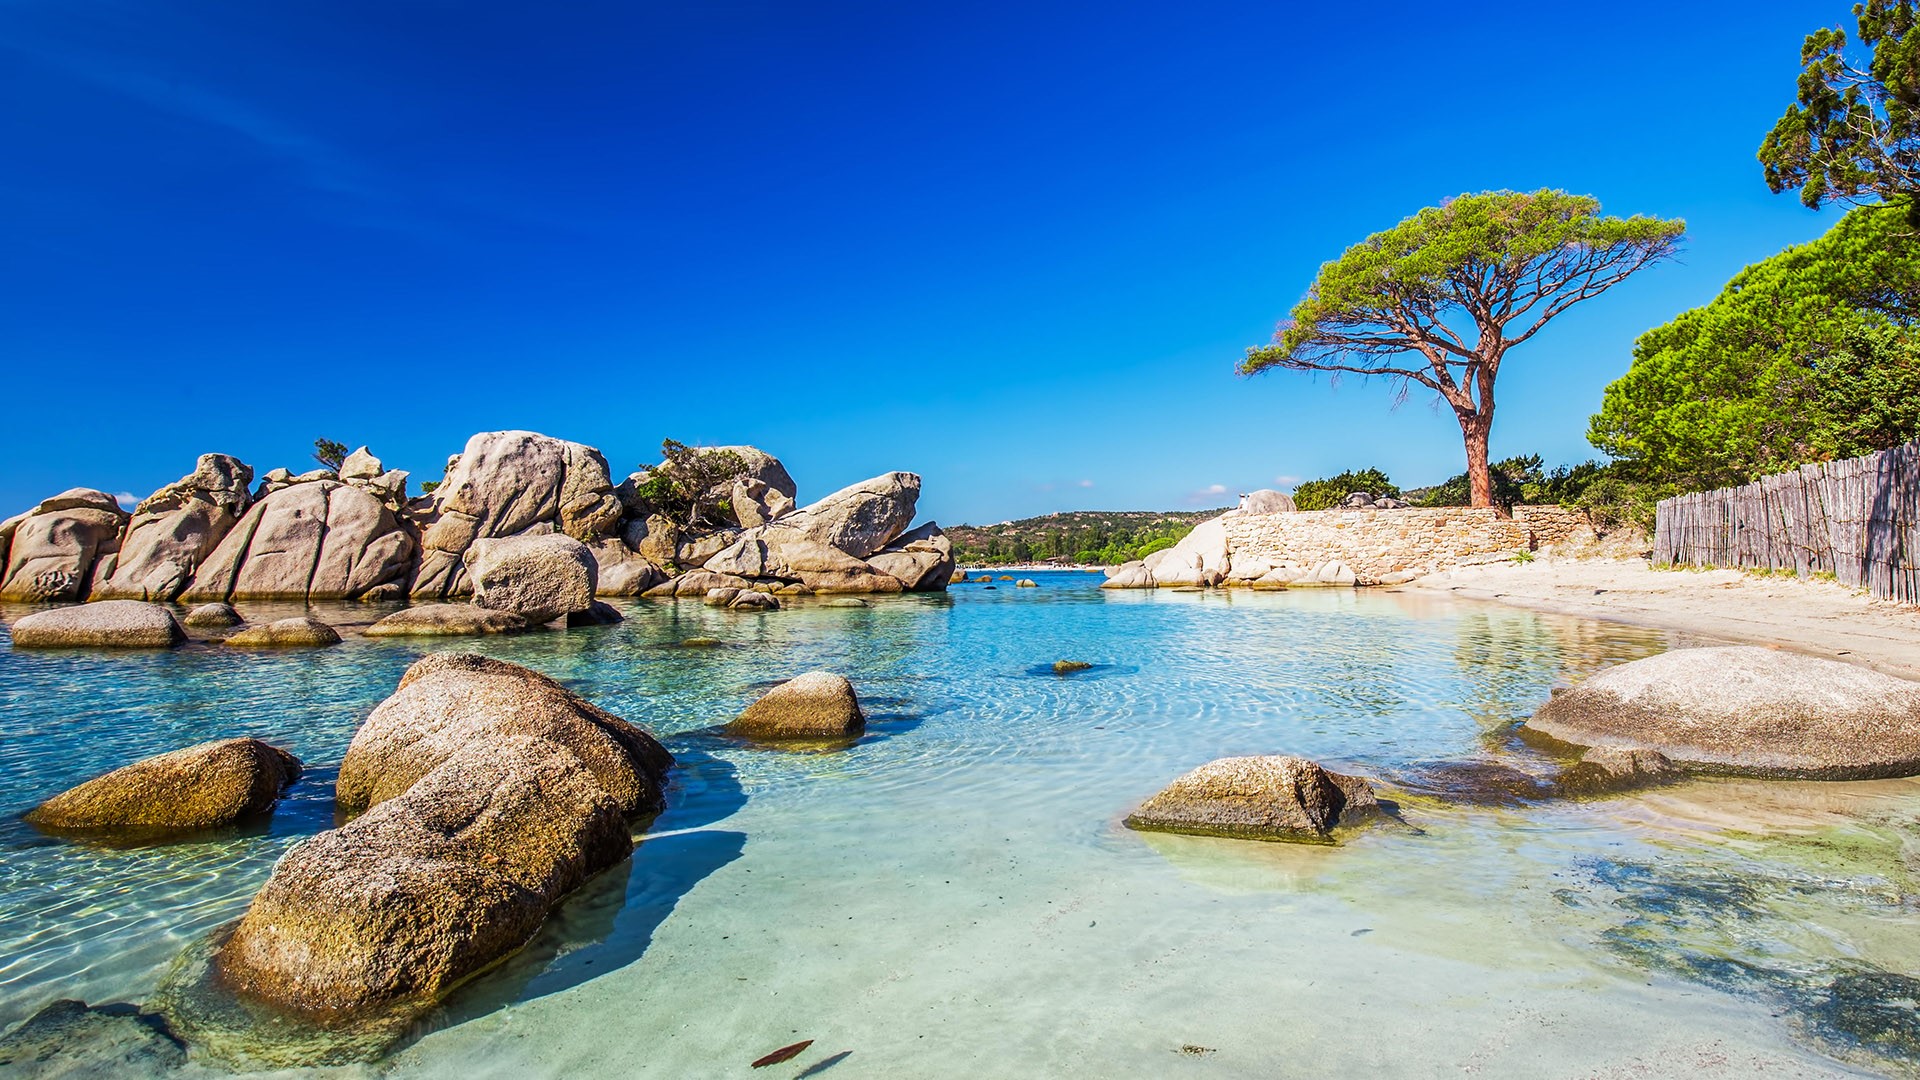 General 1920x1080 nature landscape rocks water water ripples clear sky pine trees trees Corsica France